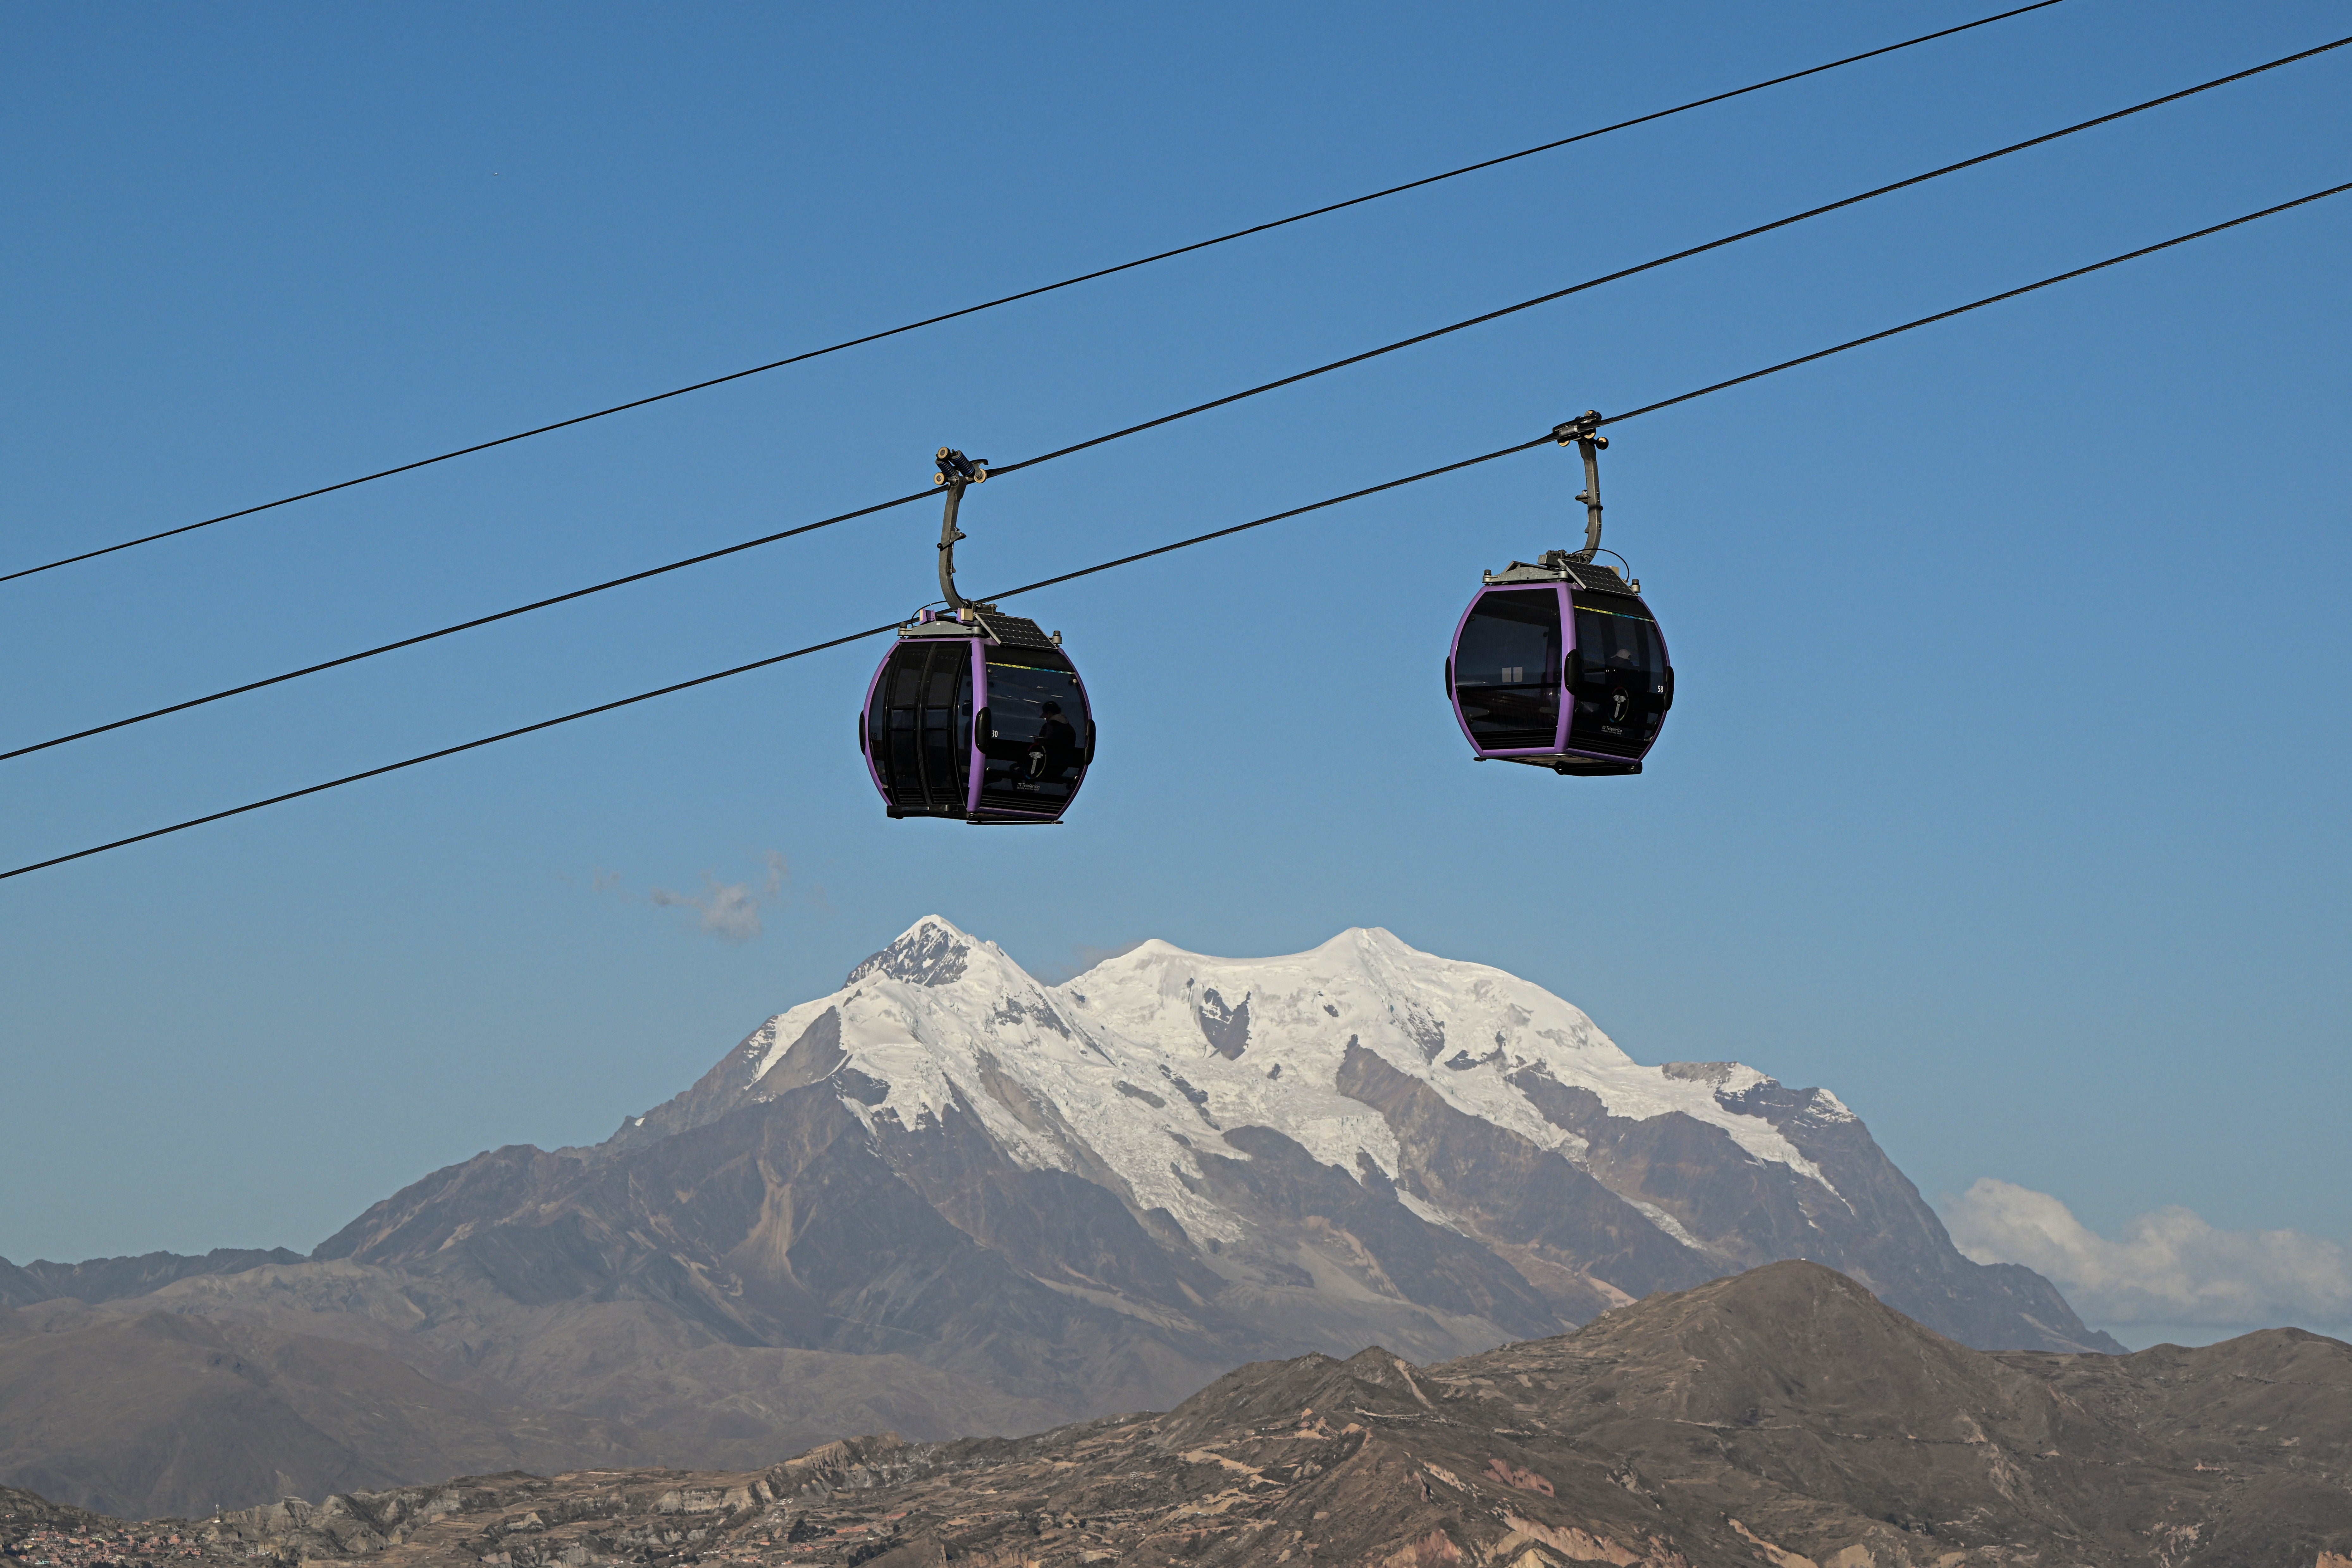 Stock image of a cable car in Bolivia. The one involved in Ms Lega’s incident was not used for transporting people